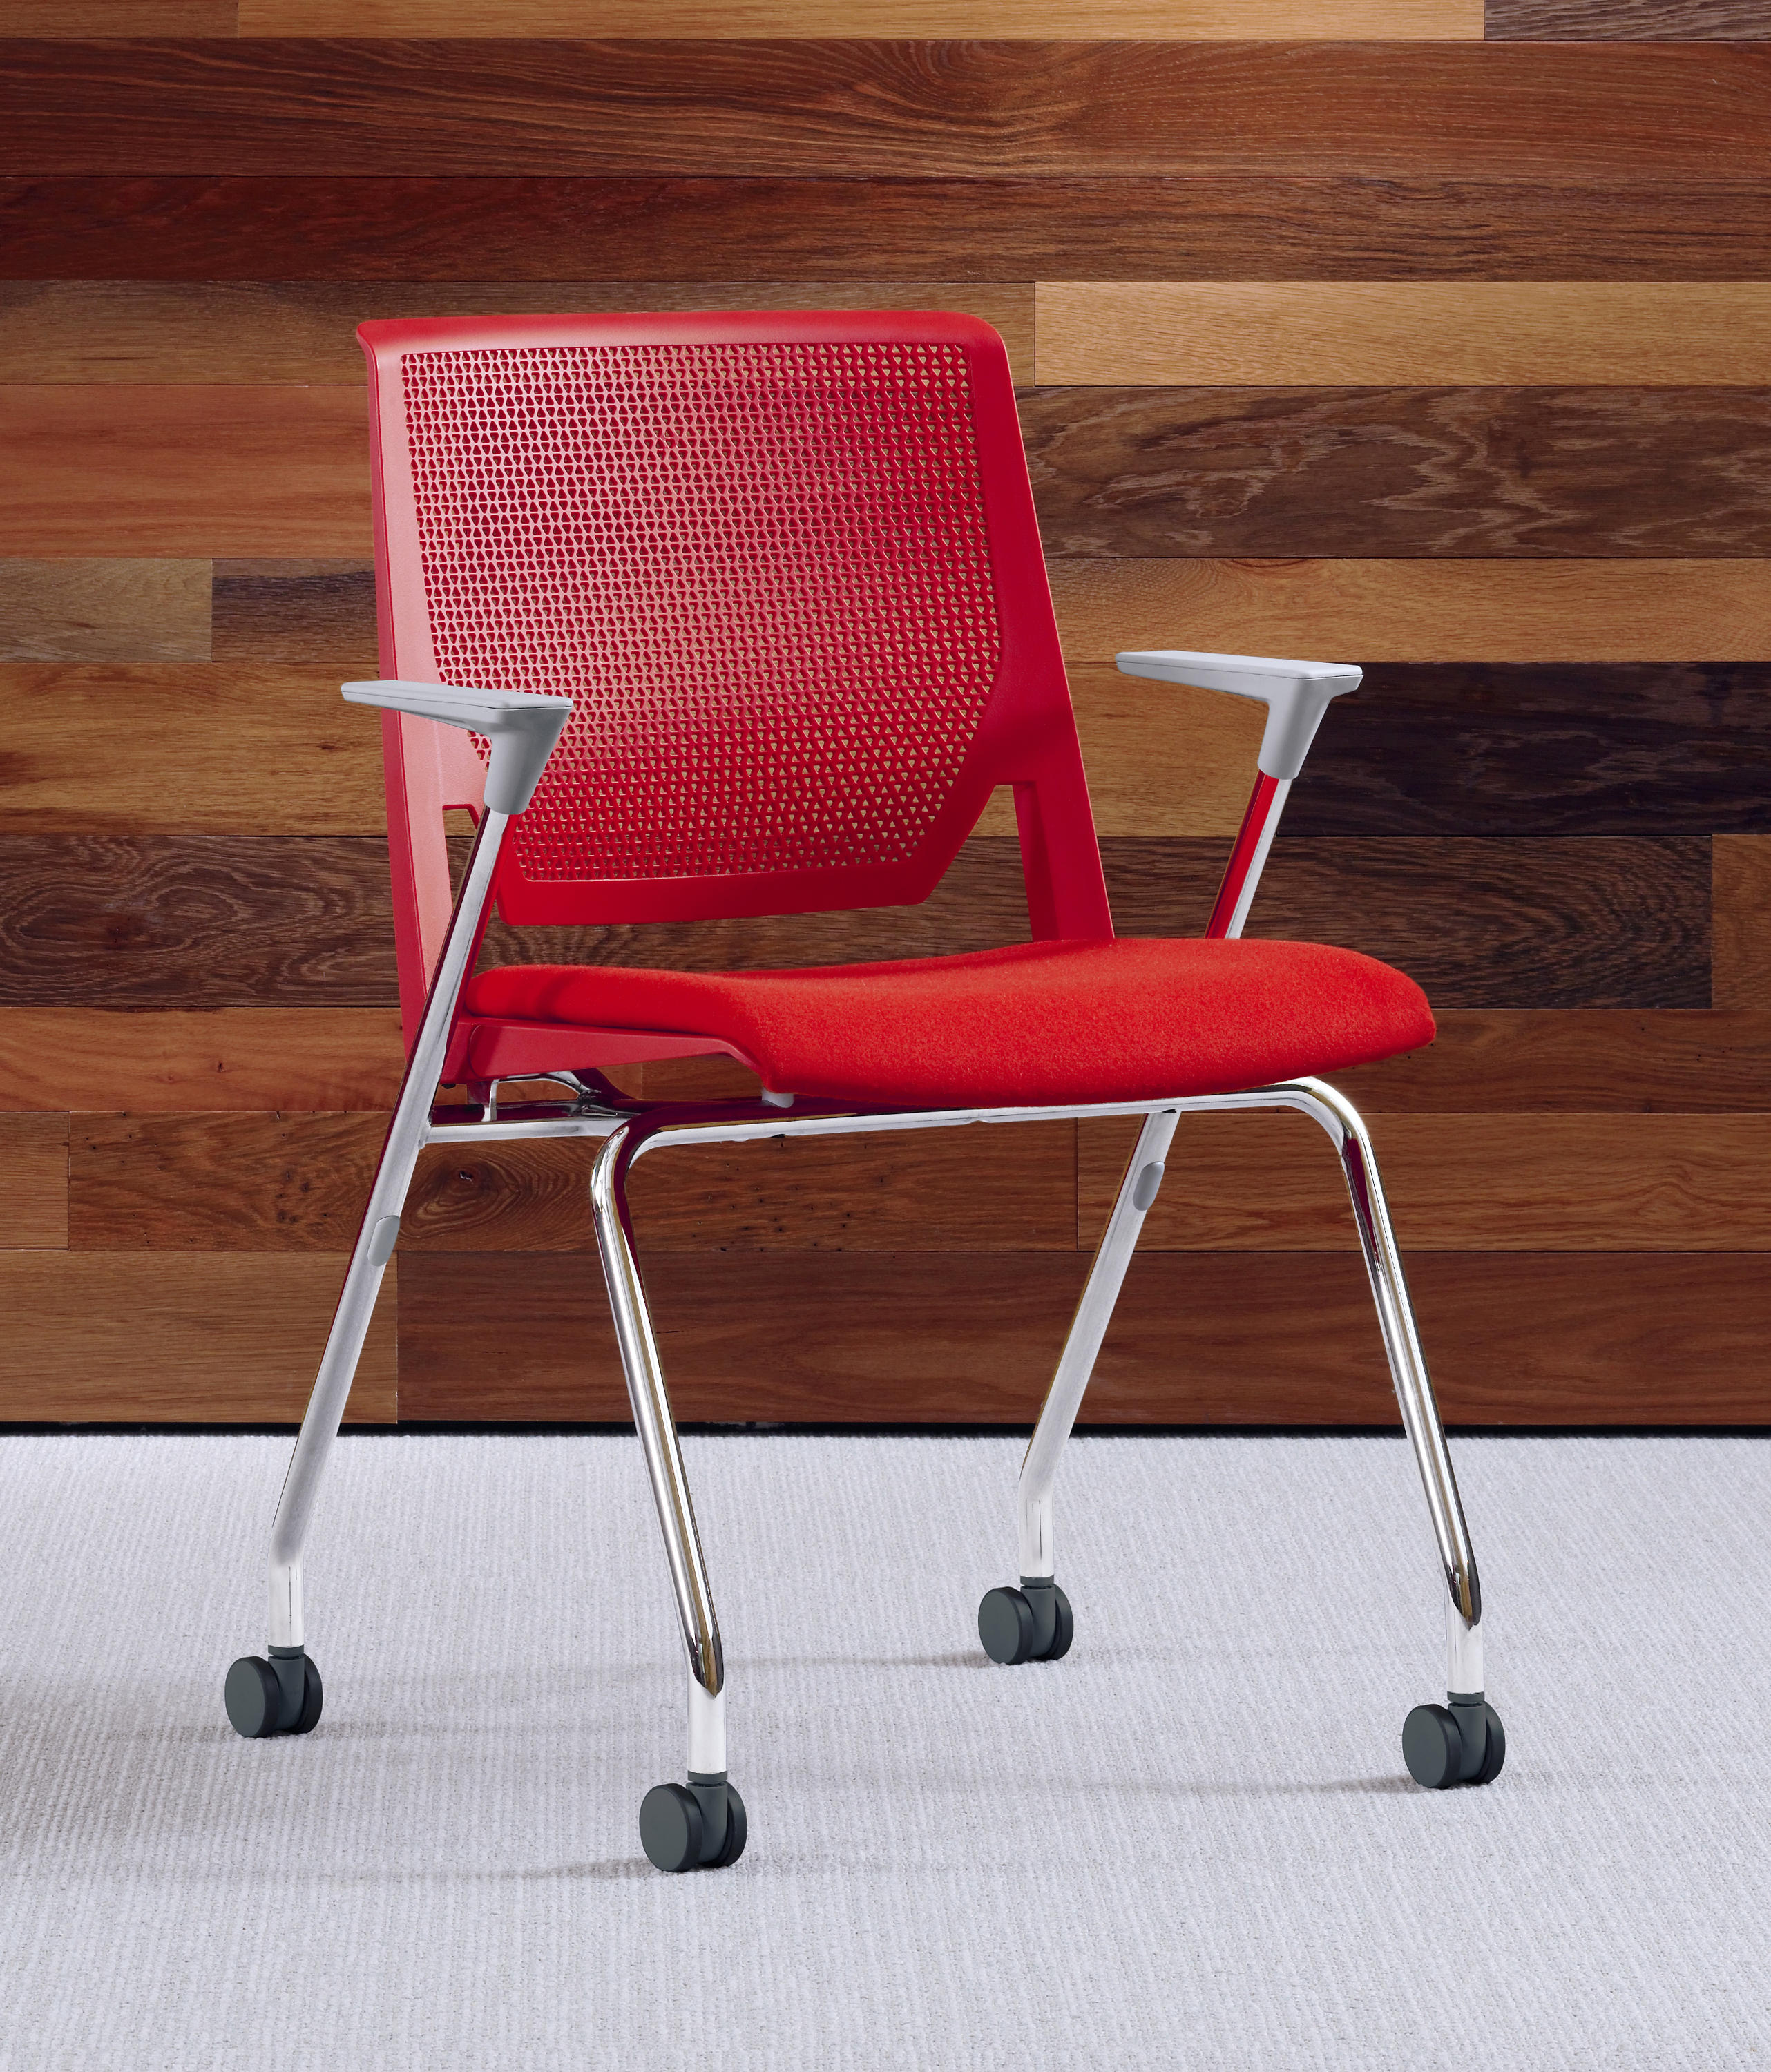 VERY - Chairs from Haworth | Architonic